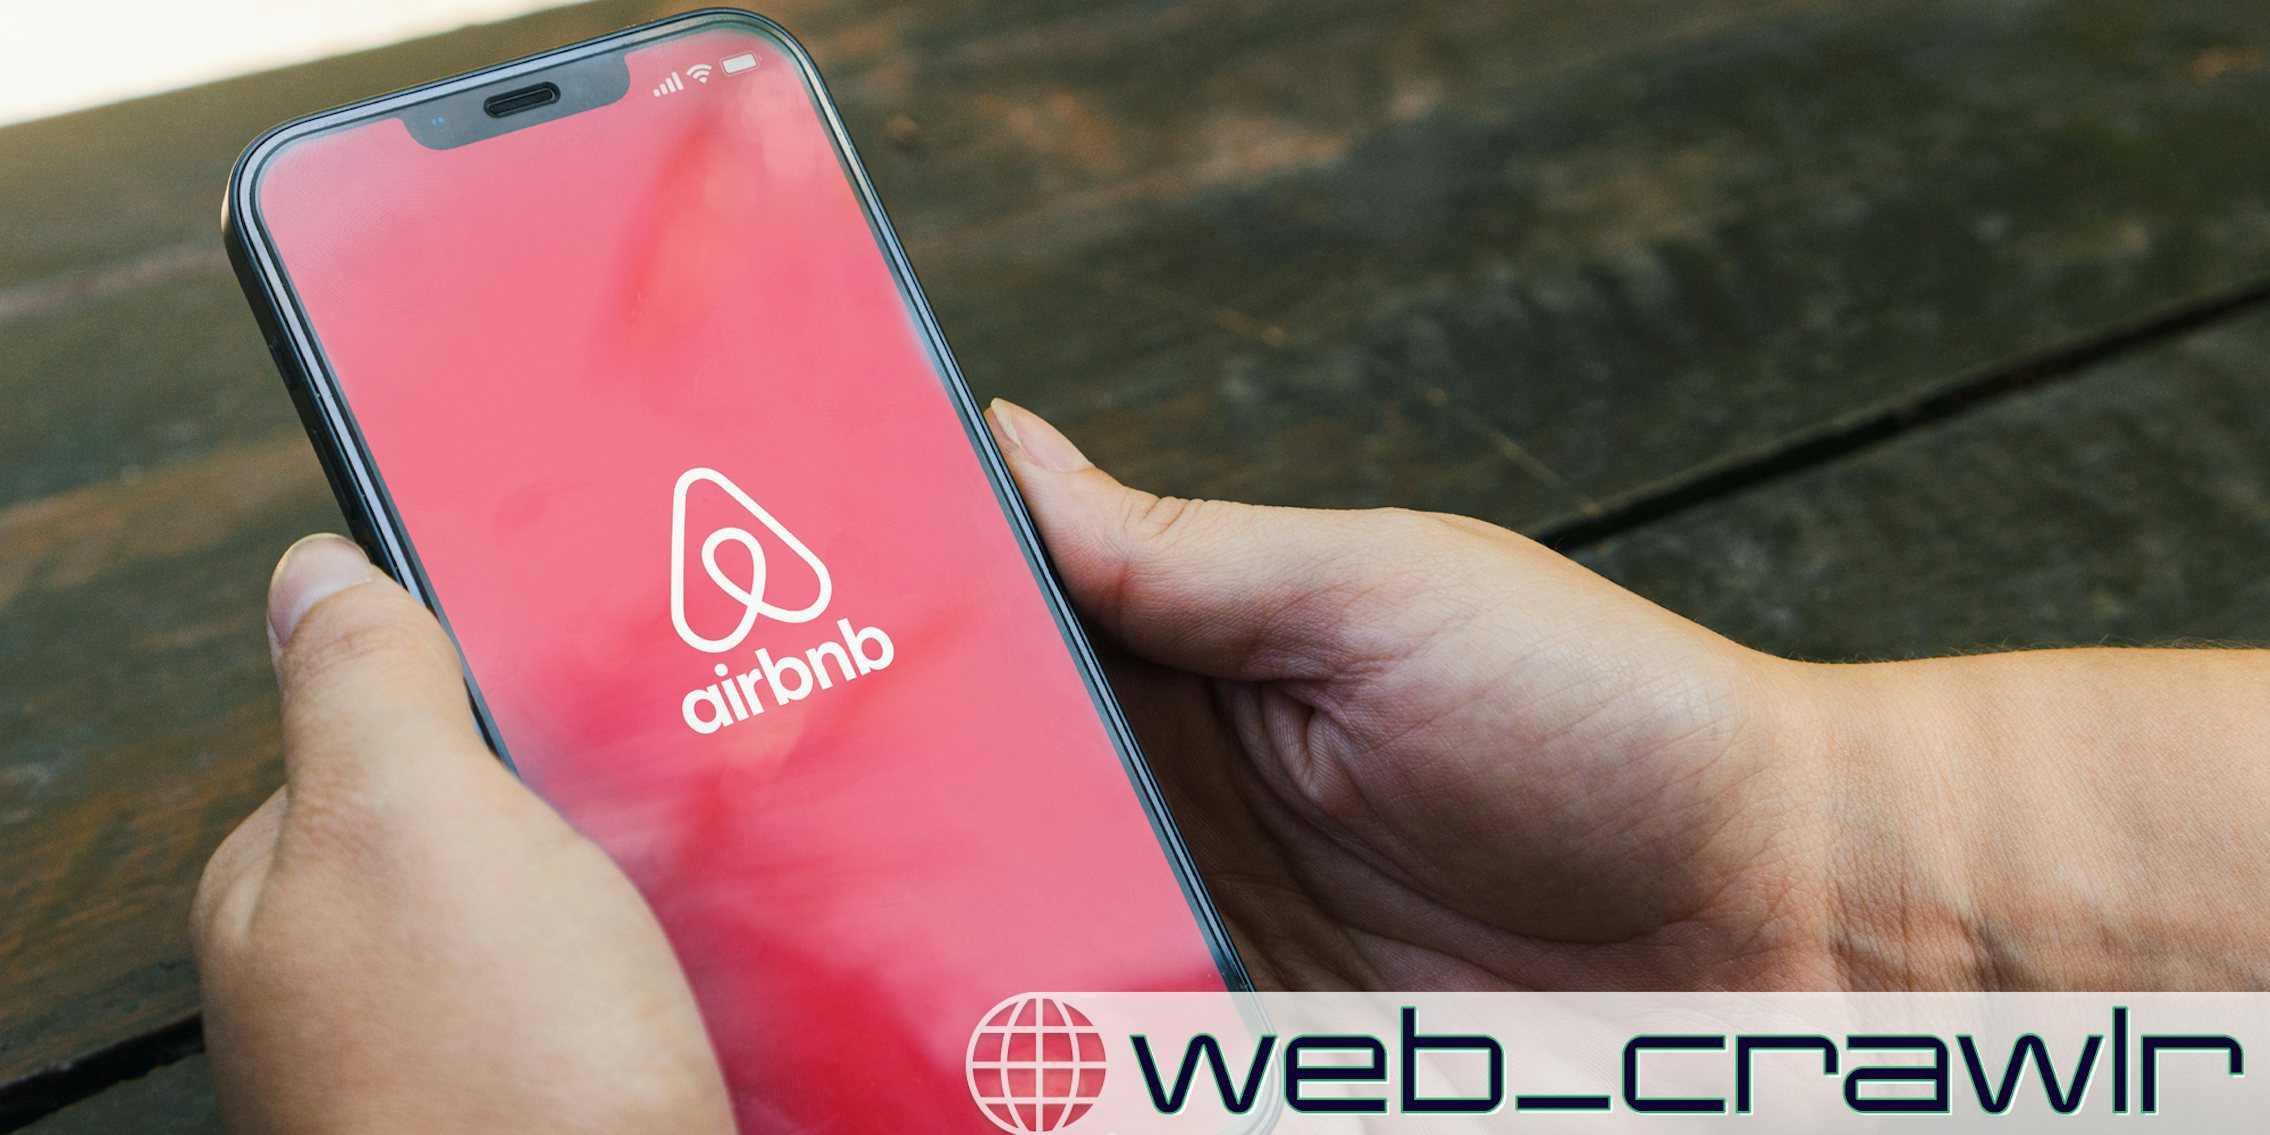 A person holding a phone with an Airbnb logo on it. The Daily Dot newsletter web_crawlr logo is in the bottom right corner.